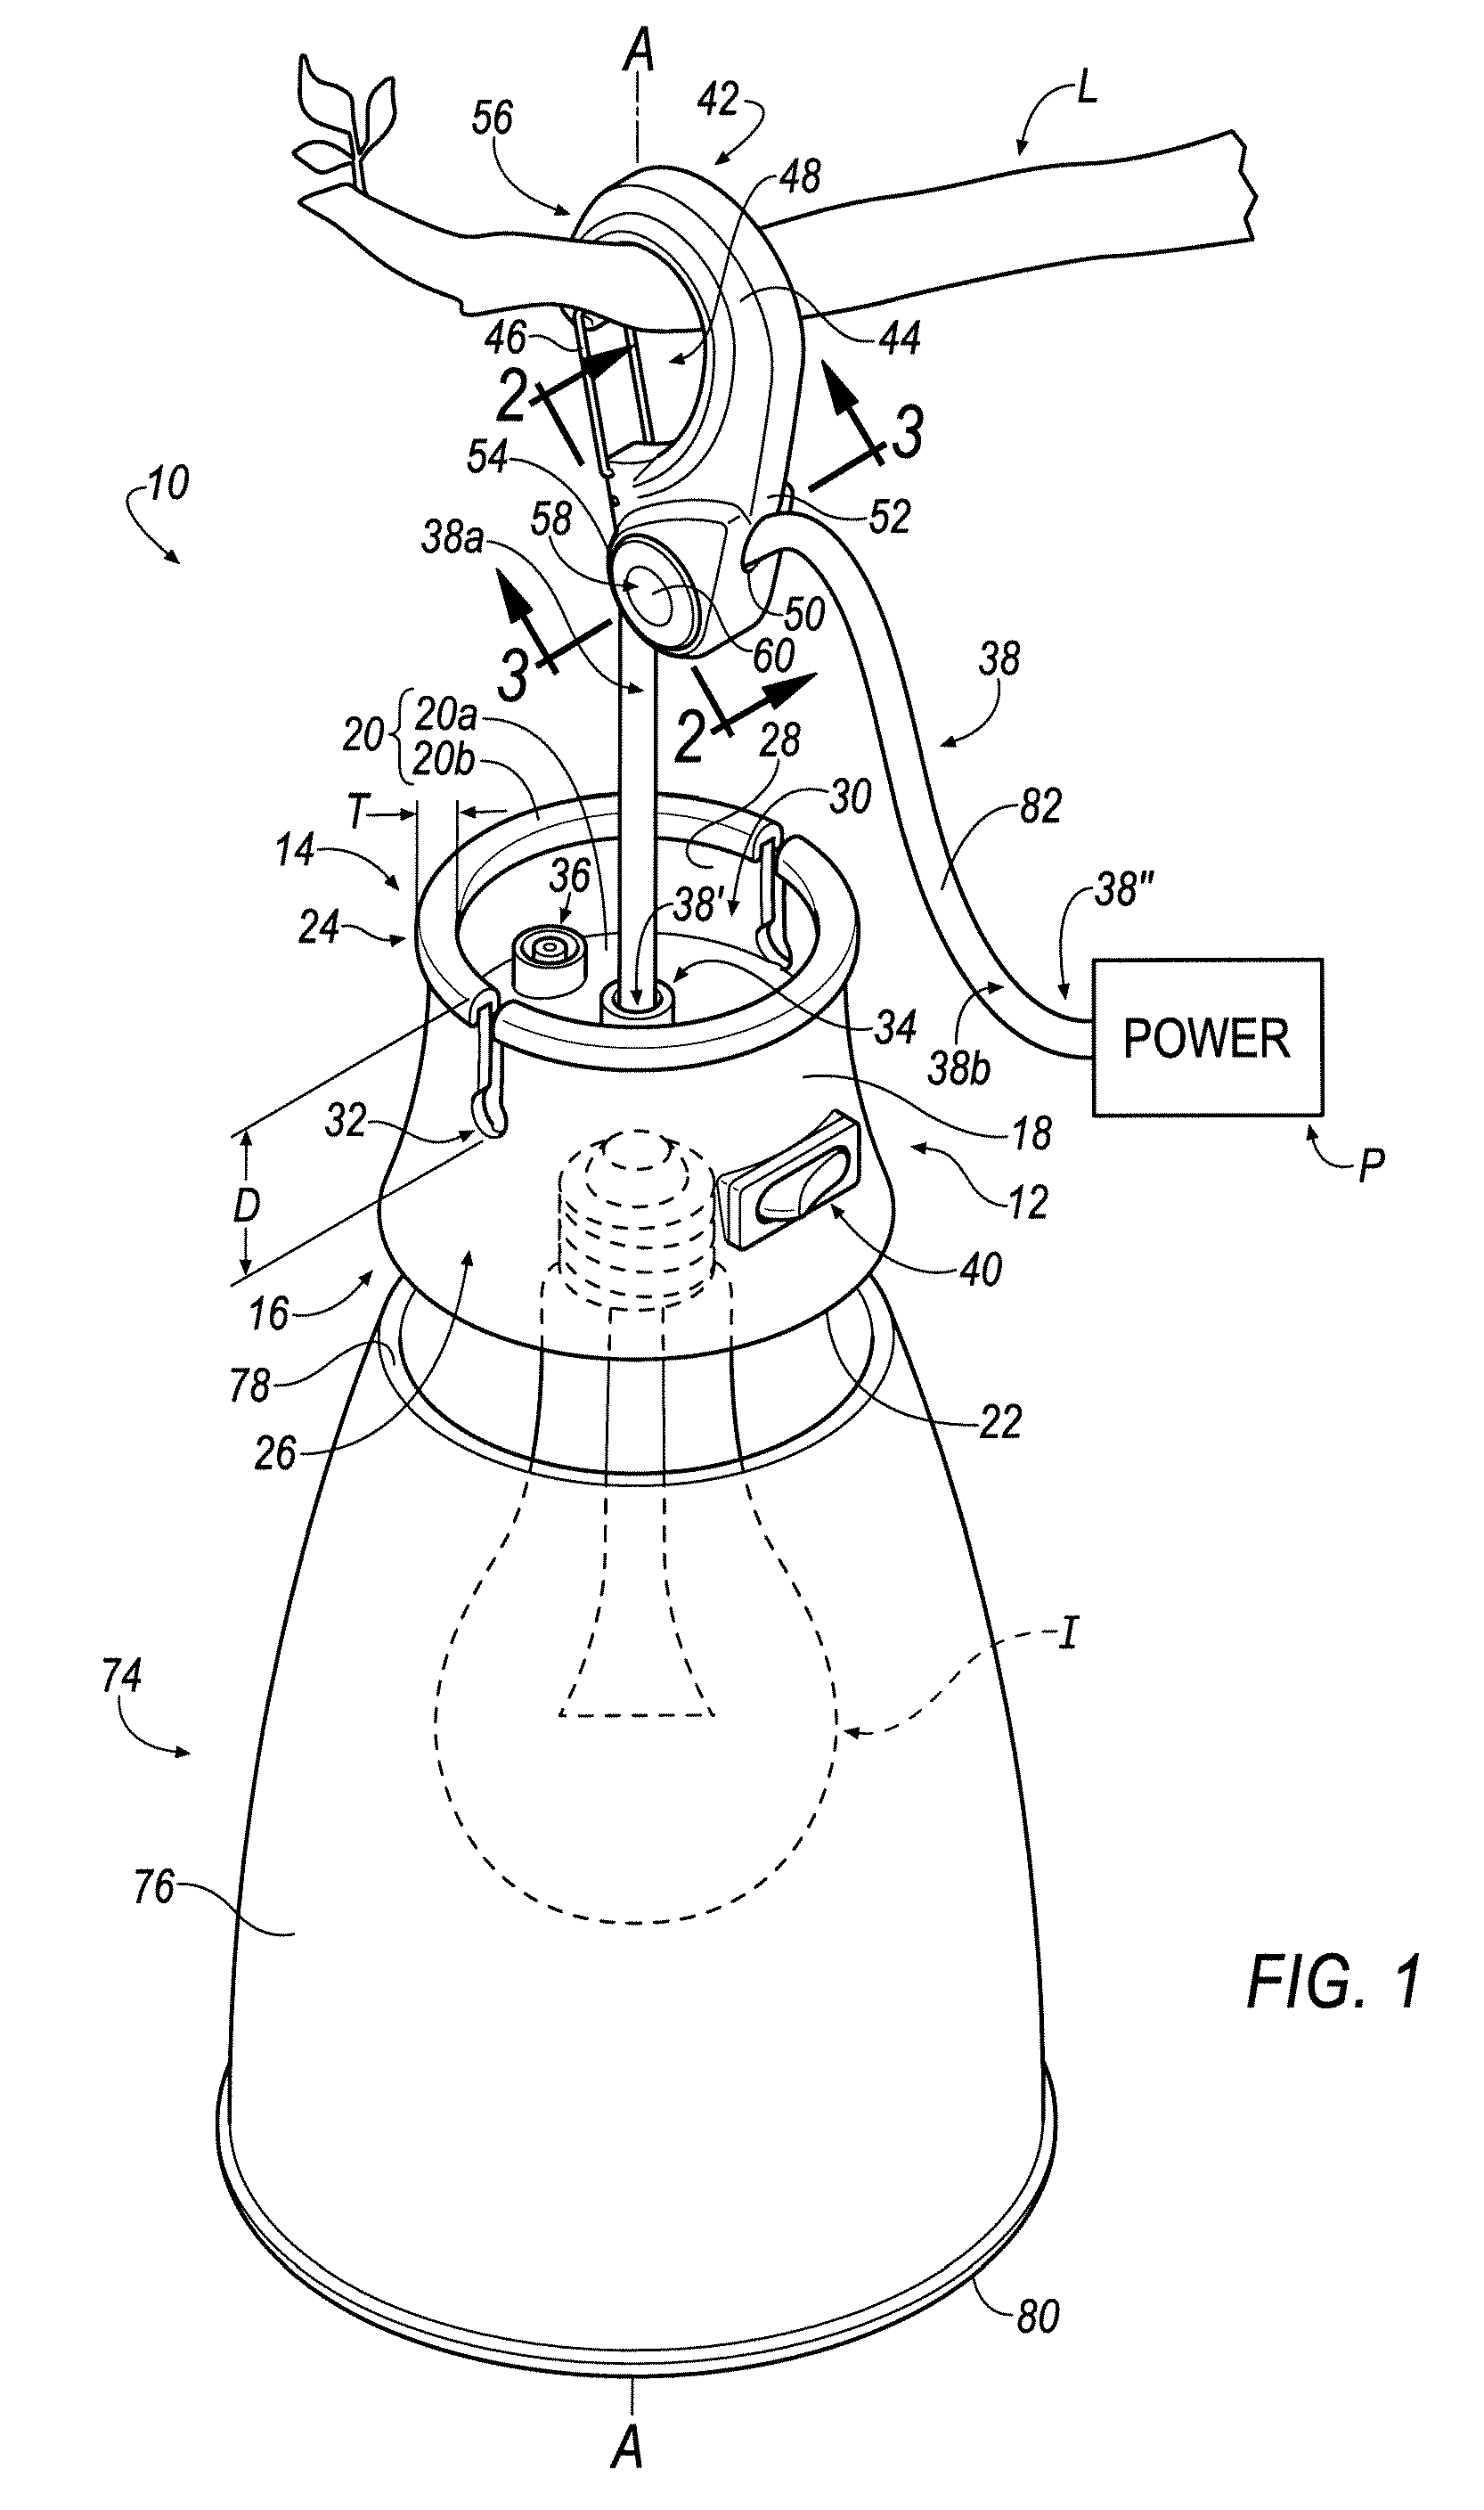 Lighting apparatus; components thereof and assemblies incorporating the same